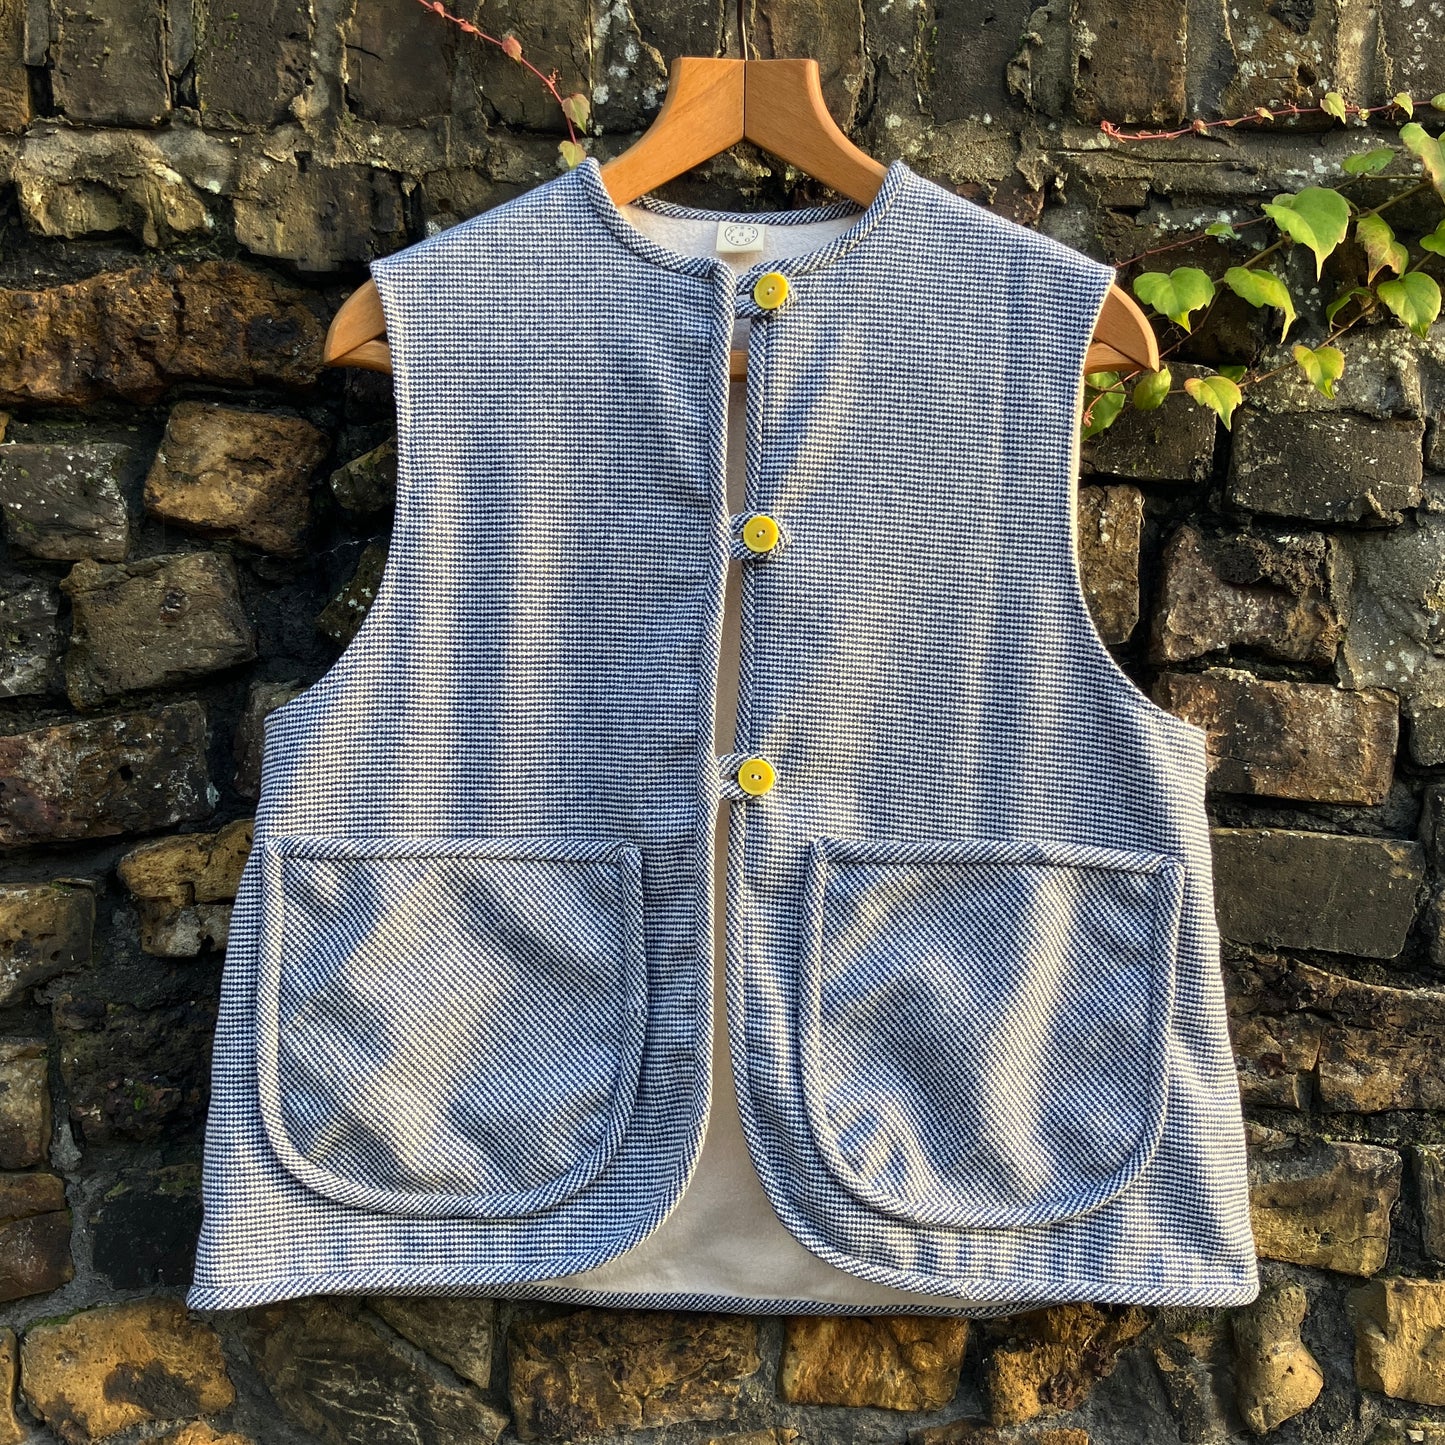 Vest-waistcoat hand made from a found remnant of soft dark blue and white dogtooth check wool.